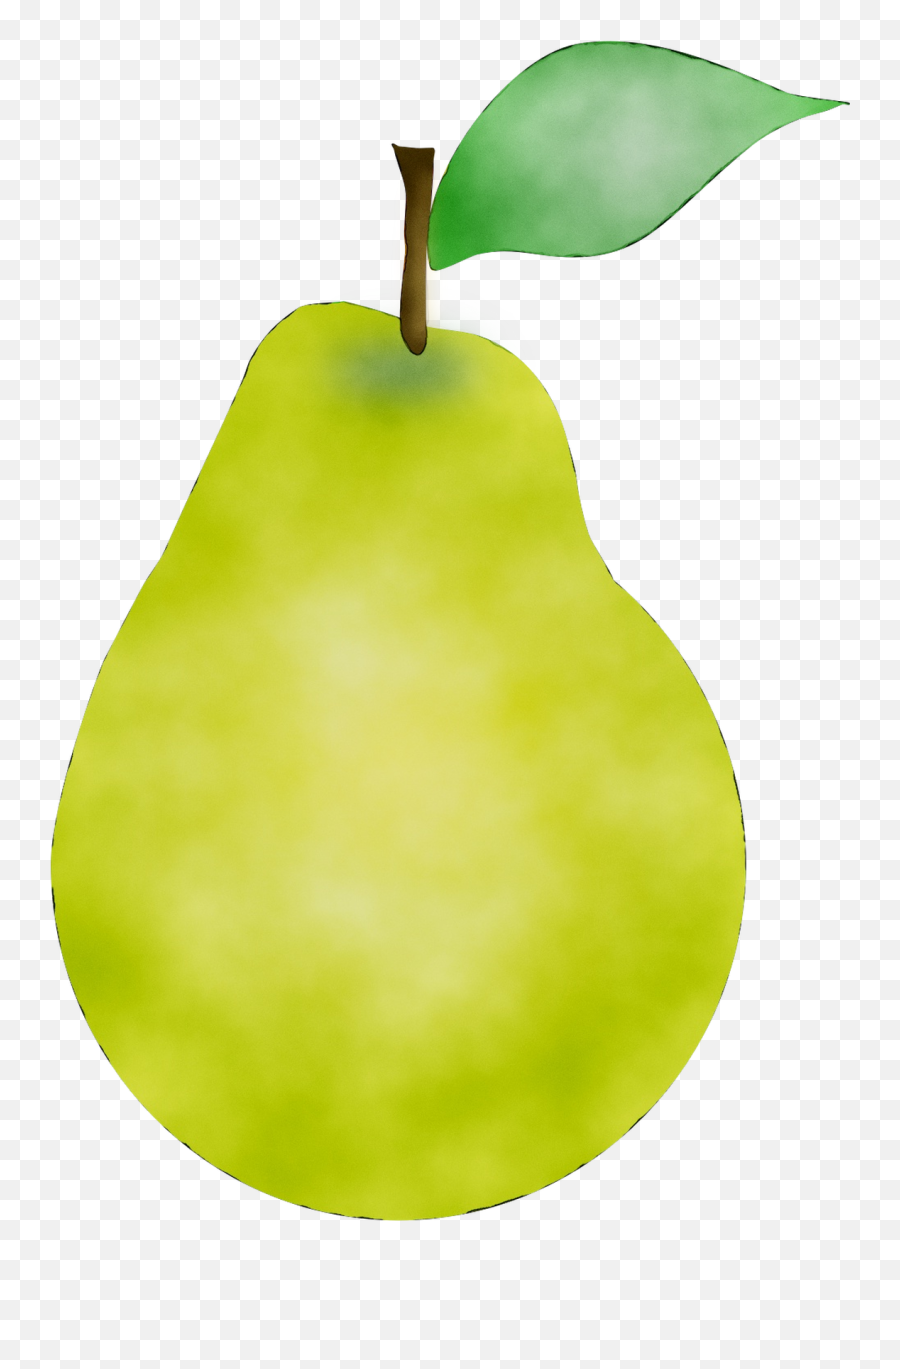 Pear Product Design Apple - Transparent Background Pear Clipart Png,Pear Png